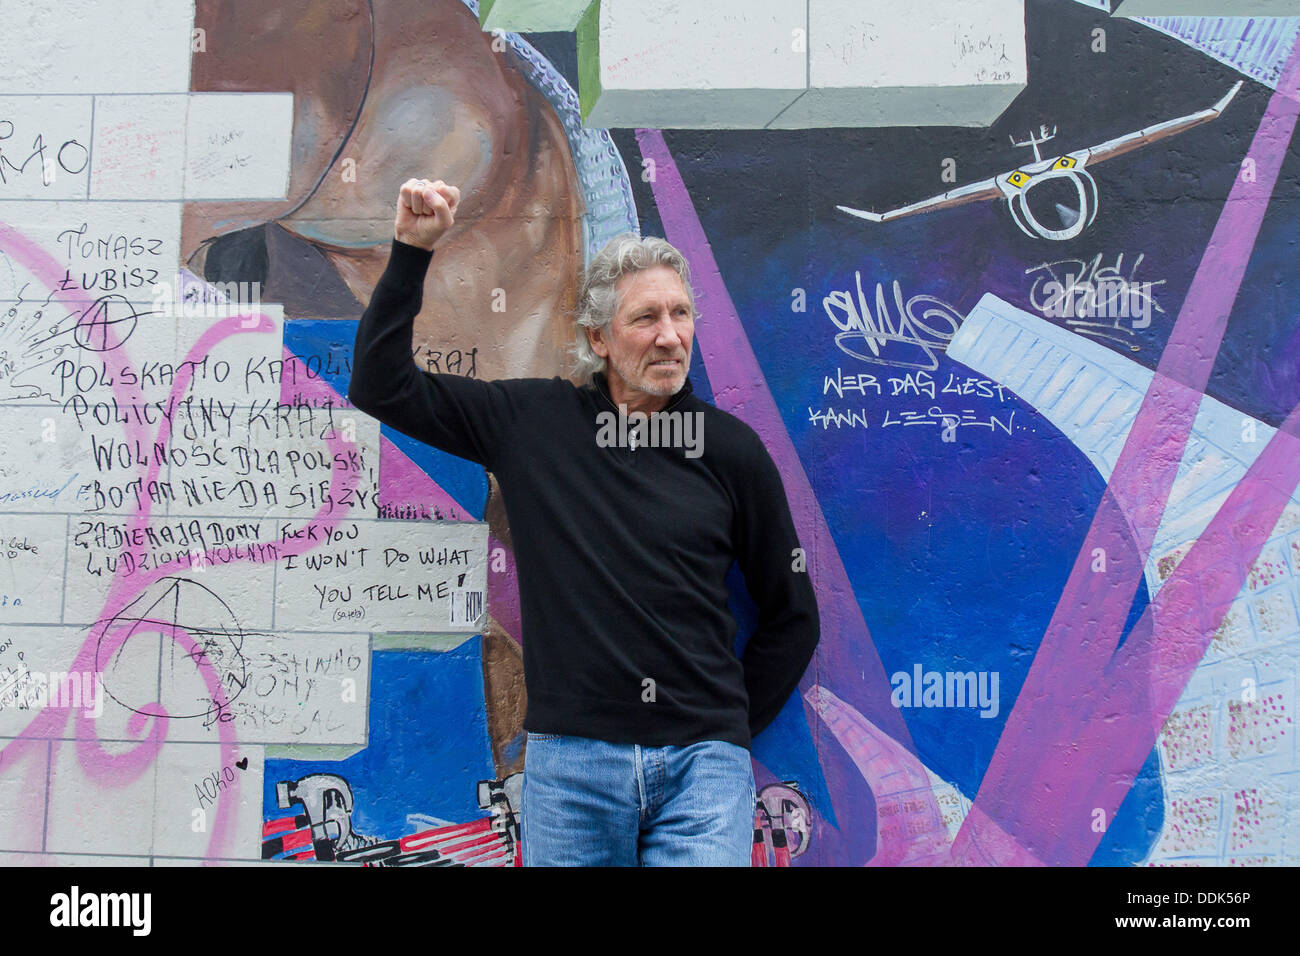 Berlin, Germany. 3rd Sept, 2013. Roger Waters supports the East Side Gallery protest. On 21 July 1990 on the occasion of the fall of the Berlin Wall, Waters organized a spectacular live concert performance of 'The Wall' at Potsdamer Platz in Berlin with many internationally known artists. At the same time, the American artist Lance Keller painted the cover image 'The Wal'l at the spot where the concert was held on the Berlin Wall, which later became the 'East Side Gallery'. © dpa picture alliance/Alamy Live News Stock Photo